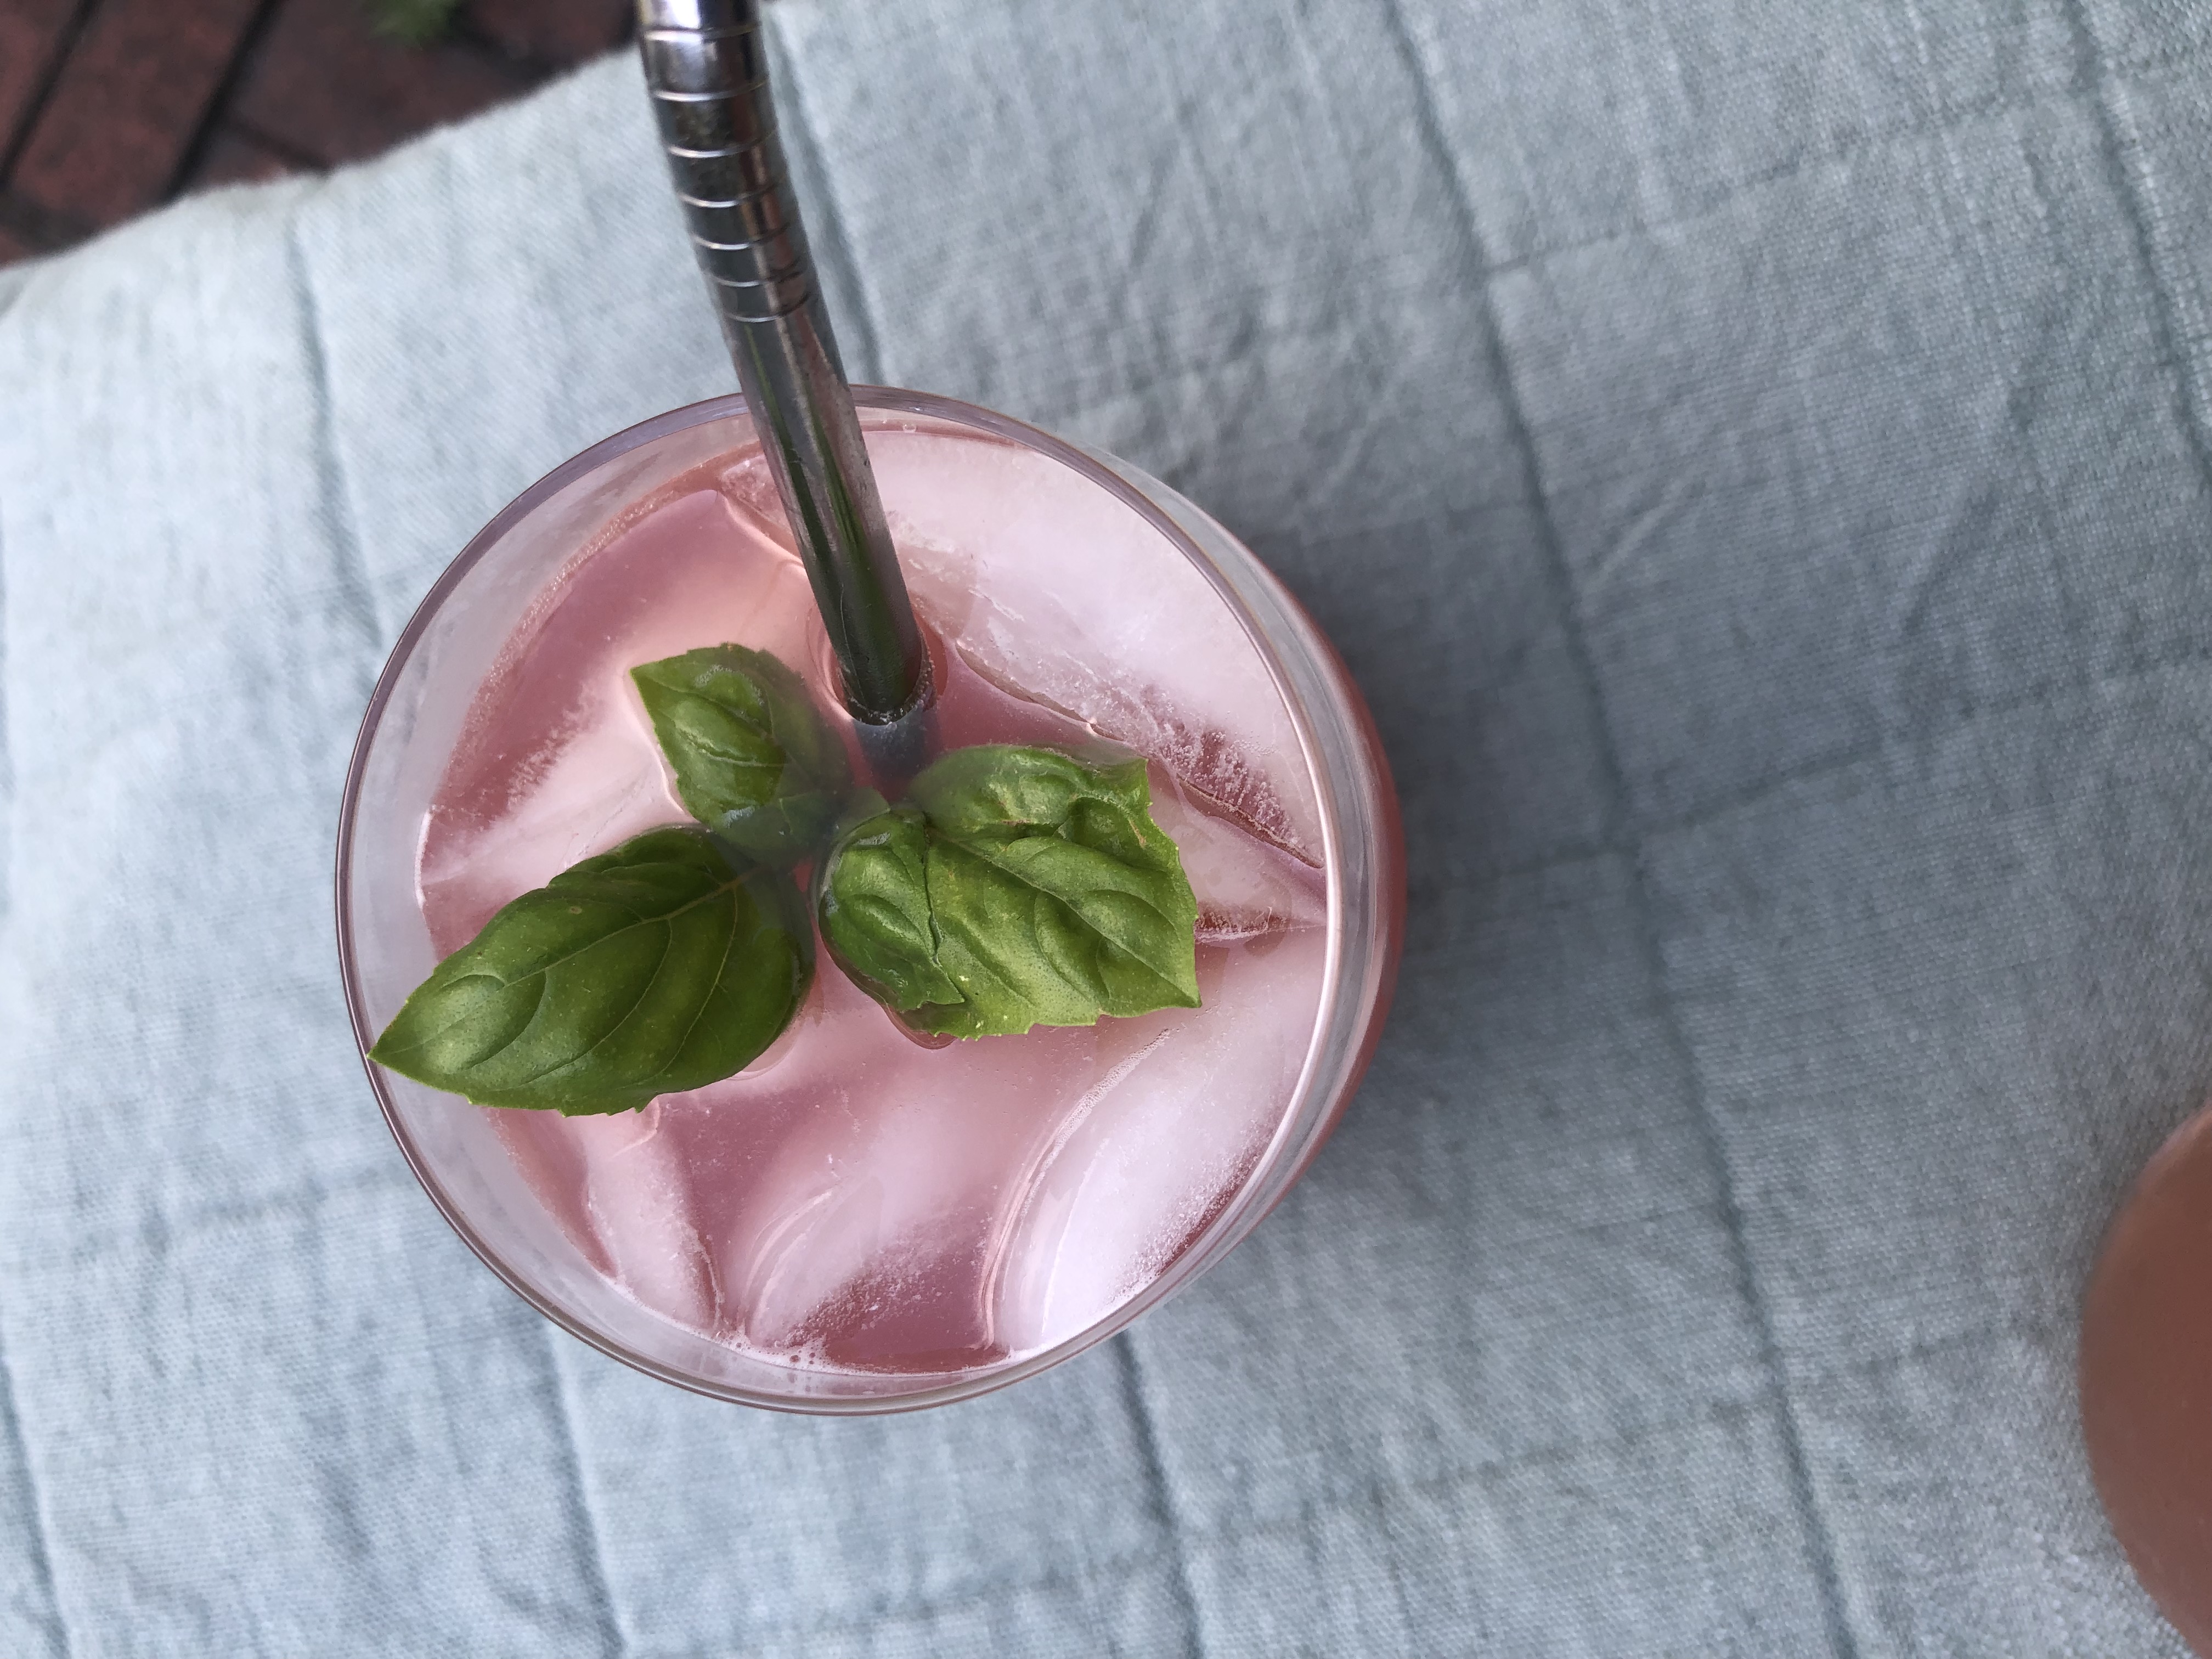 top view of a drink that is pink with a sprig of mint; a straw sticks out of one side of the glass